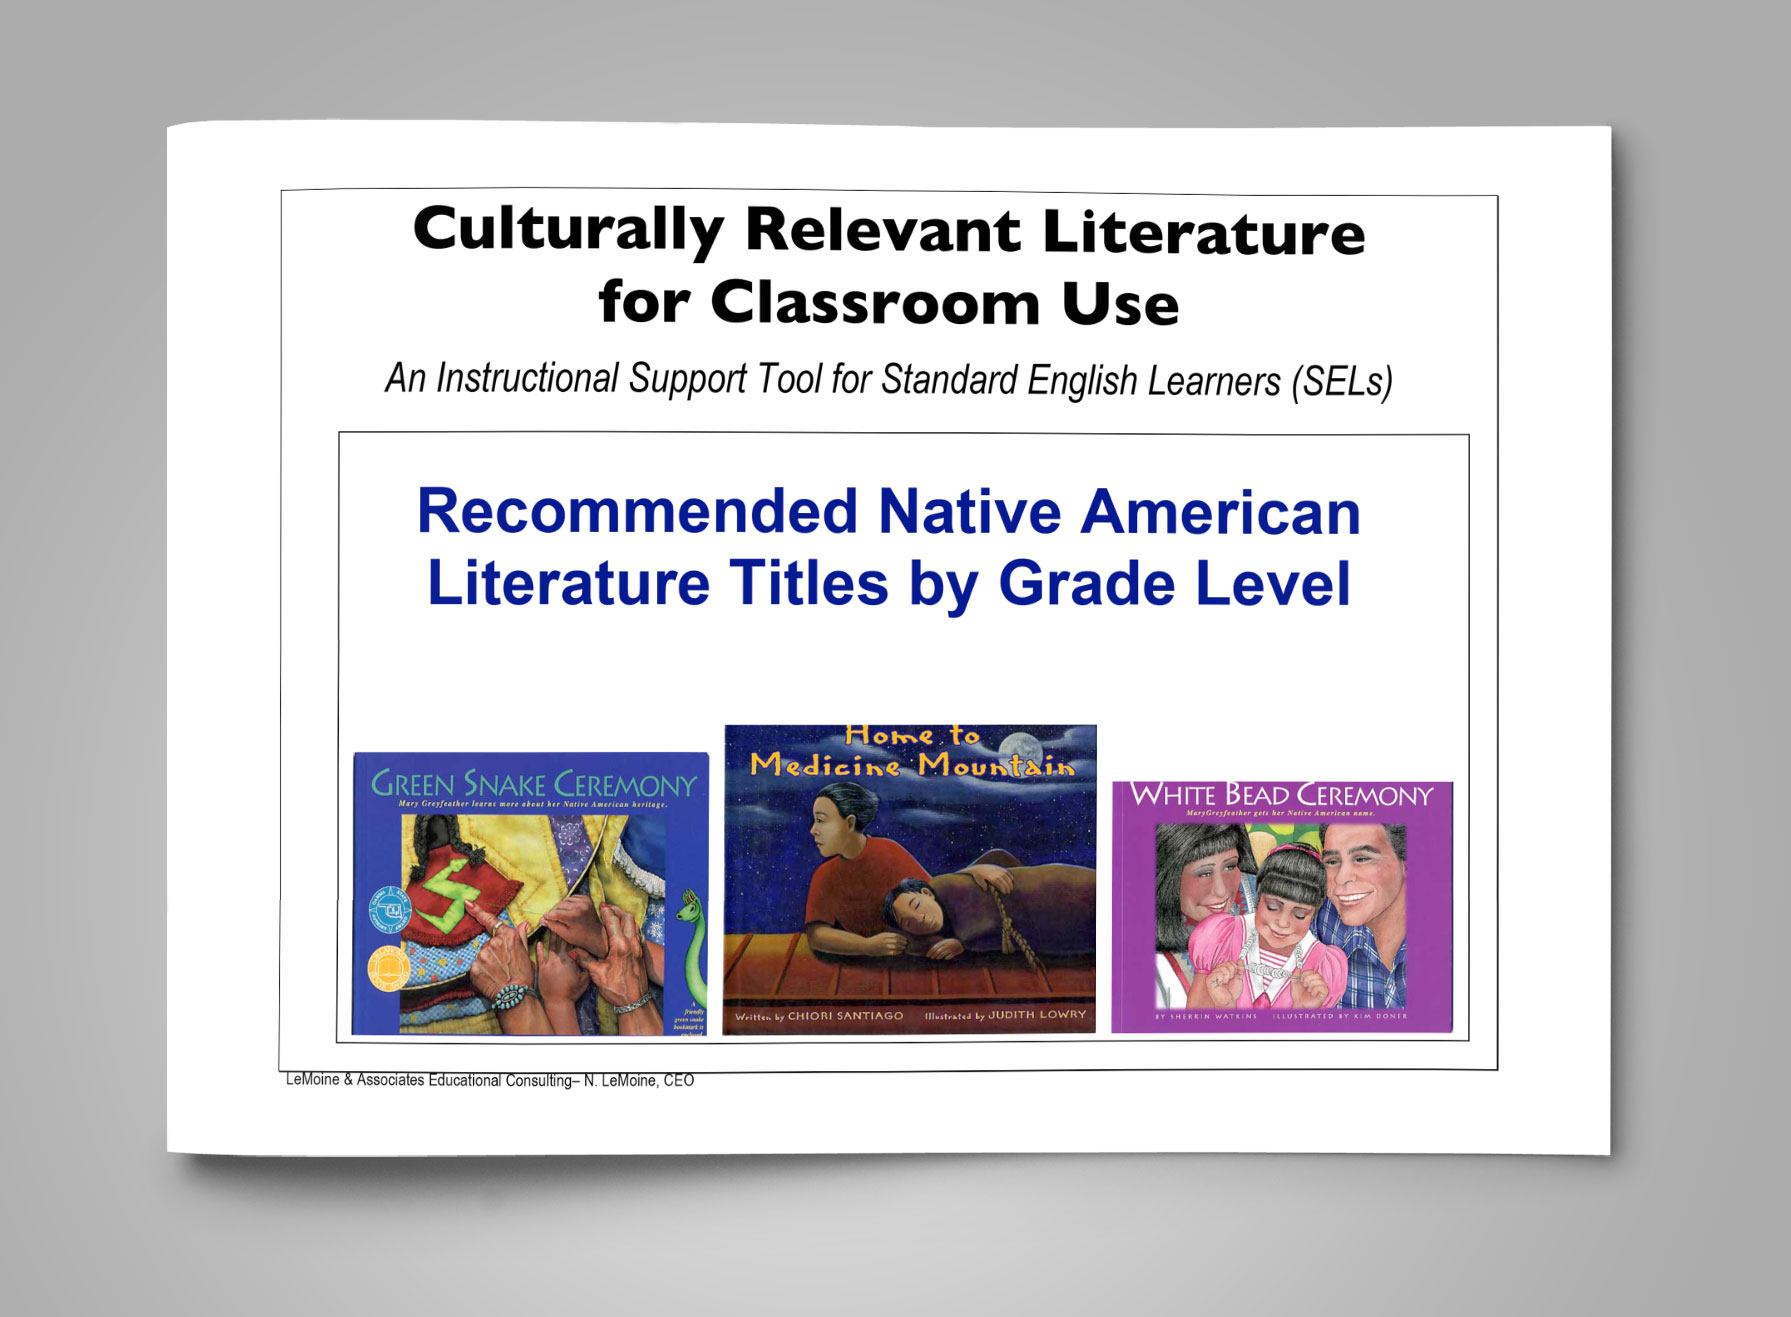 Culturally Relevant Literature for Classroom Use Recommended Native American Literature Titles by Grade Level